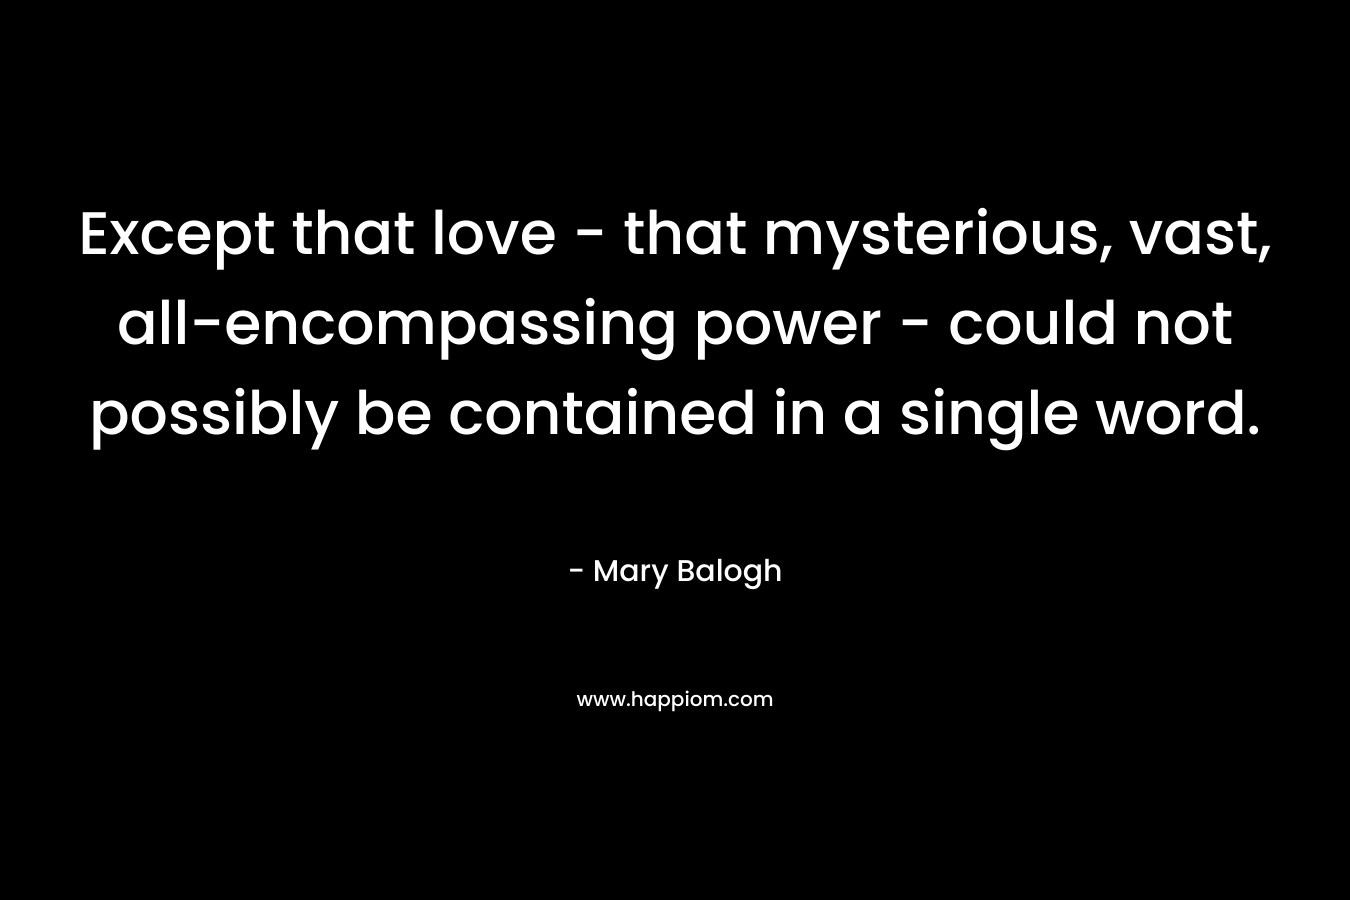 Except that love - that mysterious, vast, all-encompassing power - could not possibly be contained in a single word.